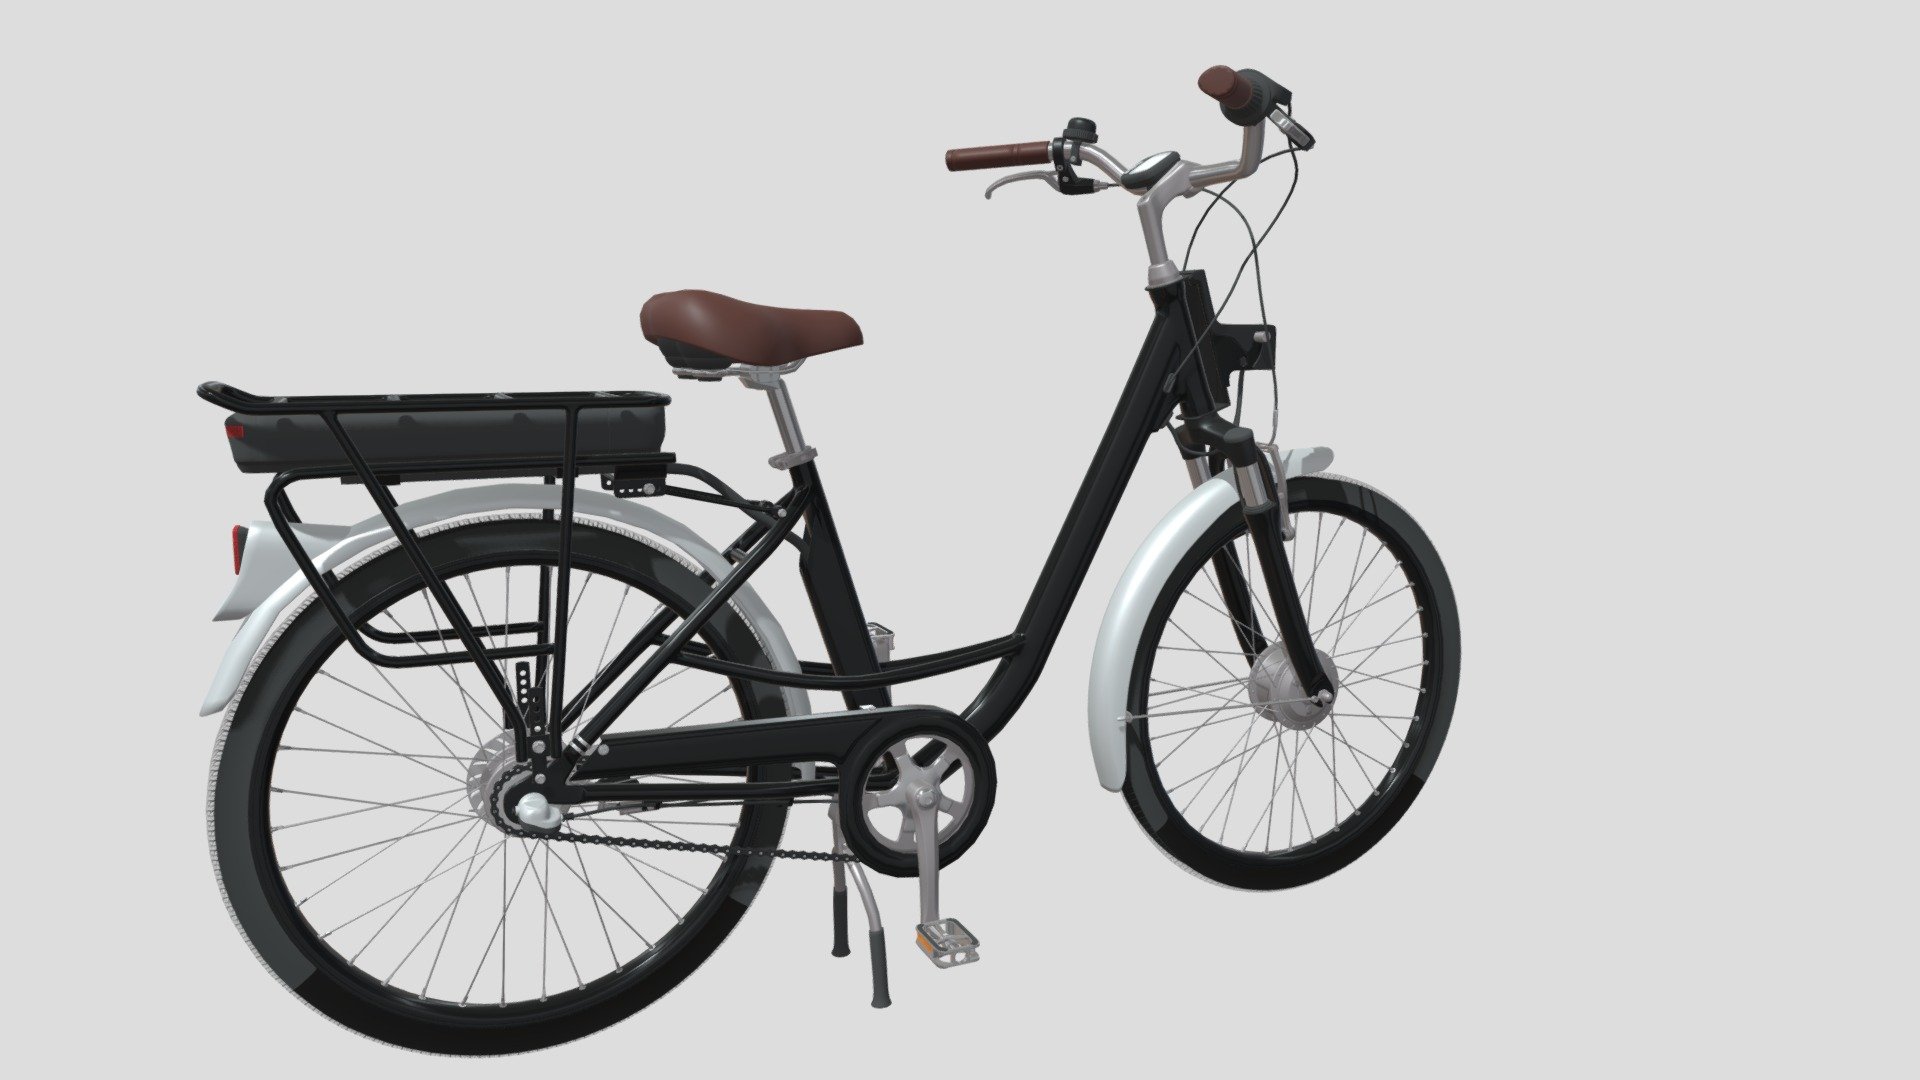 A very accurate model of an Electric Bicycle .

File formats:
-.blend, rendered with cycles, as seen in the images;
-.obj, with materials applied and textures;
-.dae, with materials applied and textures;
-.fbx, with material slots applied;
-.stl;

3D Software:
This 3d model was originally created in Blender 2.79 and rendered with Cycles.

Materials and textures:
The model has materials applied in all formats, and is ready to import and render.
The model comes with multiple png image textures.

Preview scenes:
The preview images are rendered in Blender using its built-in render engine &lsquo;Cycles'.
Note that the blend files come directly with the rendering scene included and the render command will generate the exact result as seen in previews.
Scene elements are on a different layer from the actual model for easier manipulation of objects.

General:
The model is built strictly out of quads and is subdivisable.
It comes in separate parts, named correctly for the sake of convenience 3d model